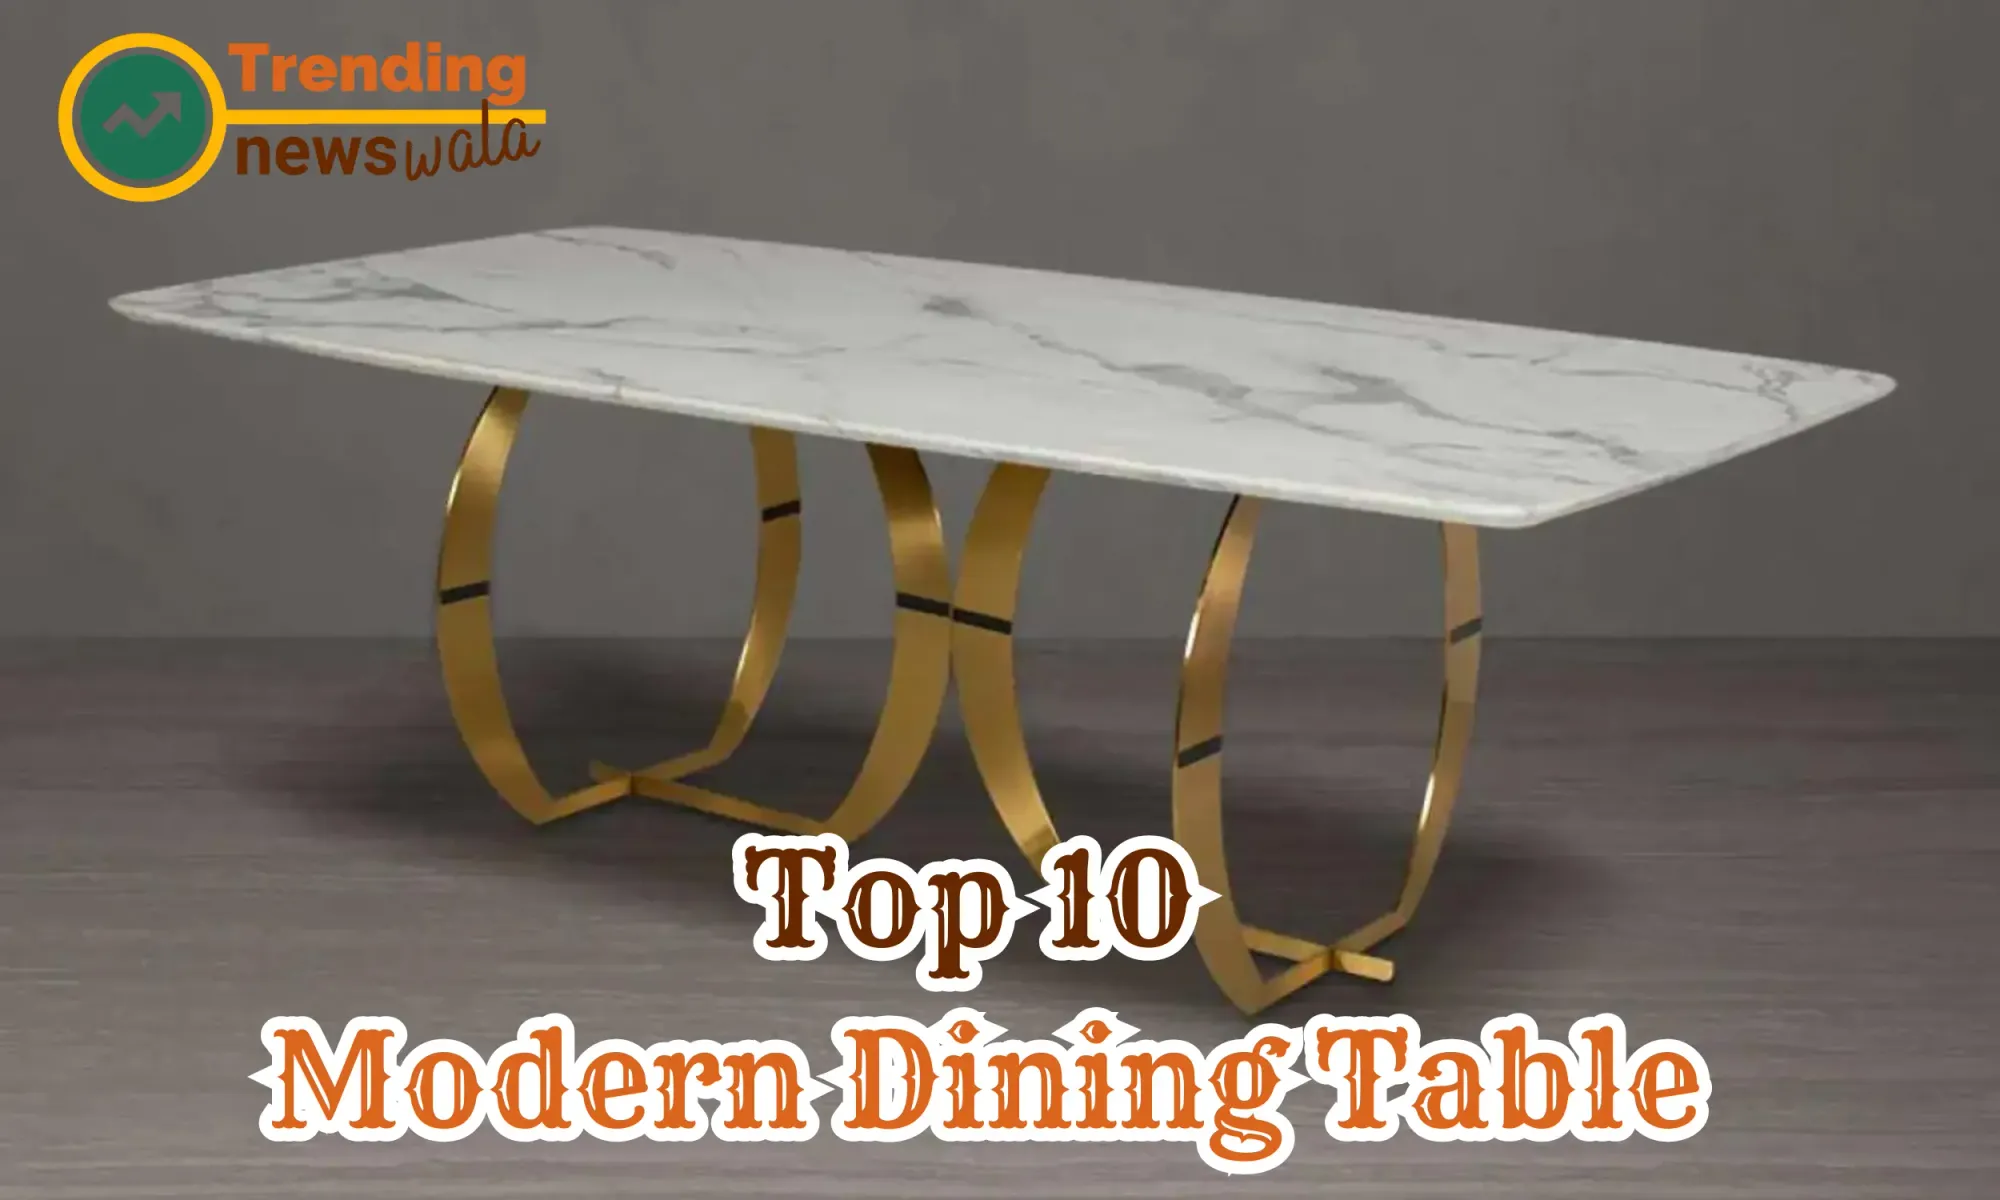 Top 10 Modern Dining Table's